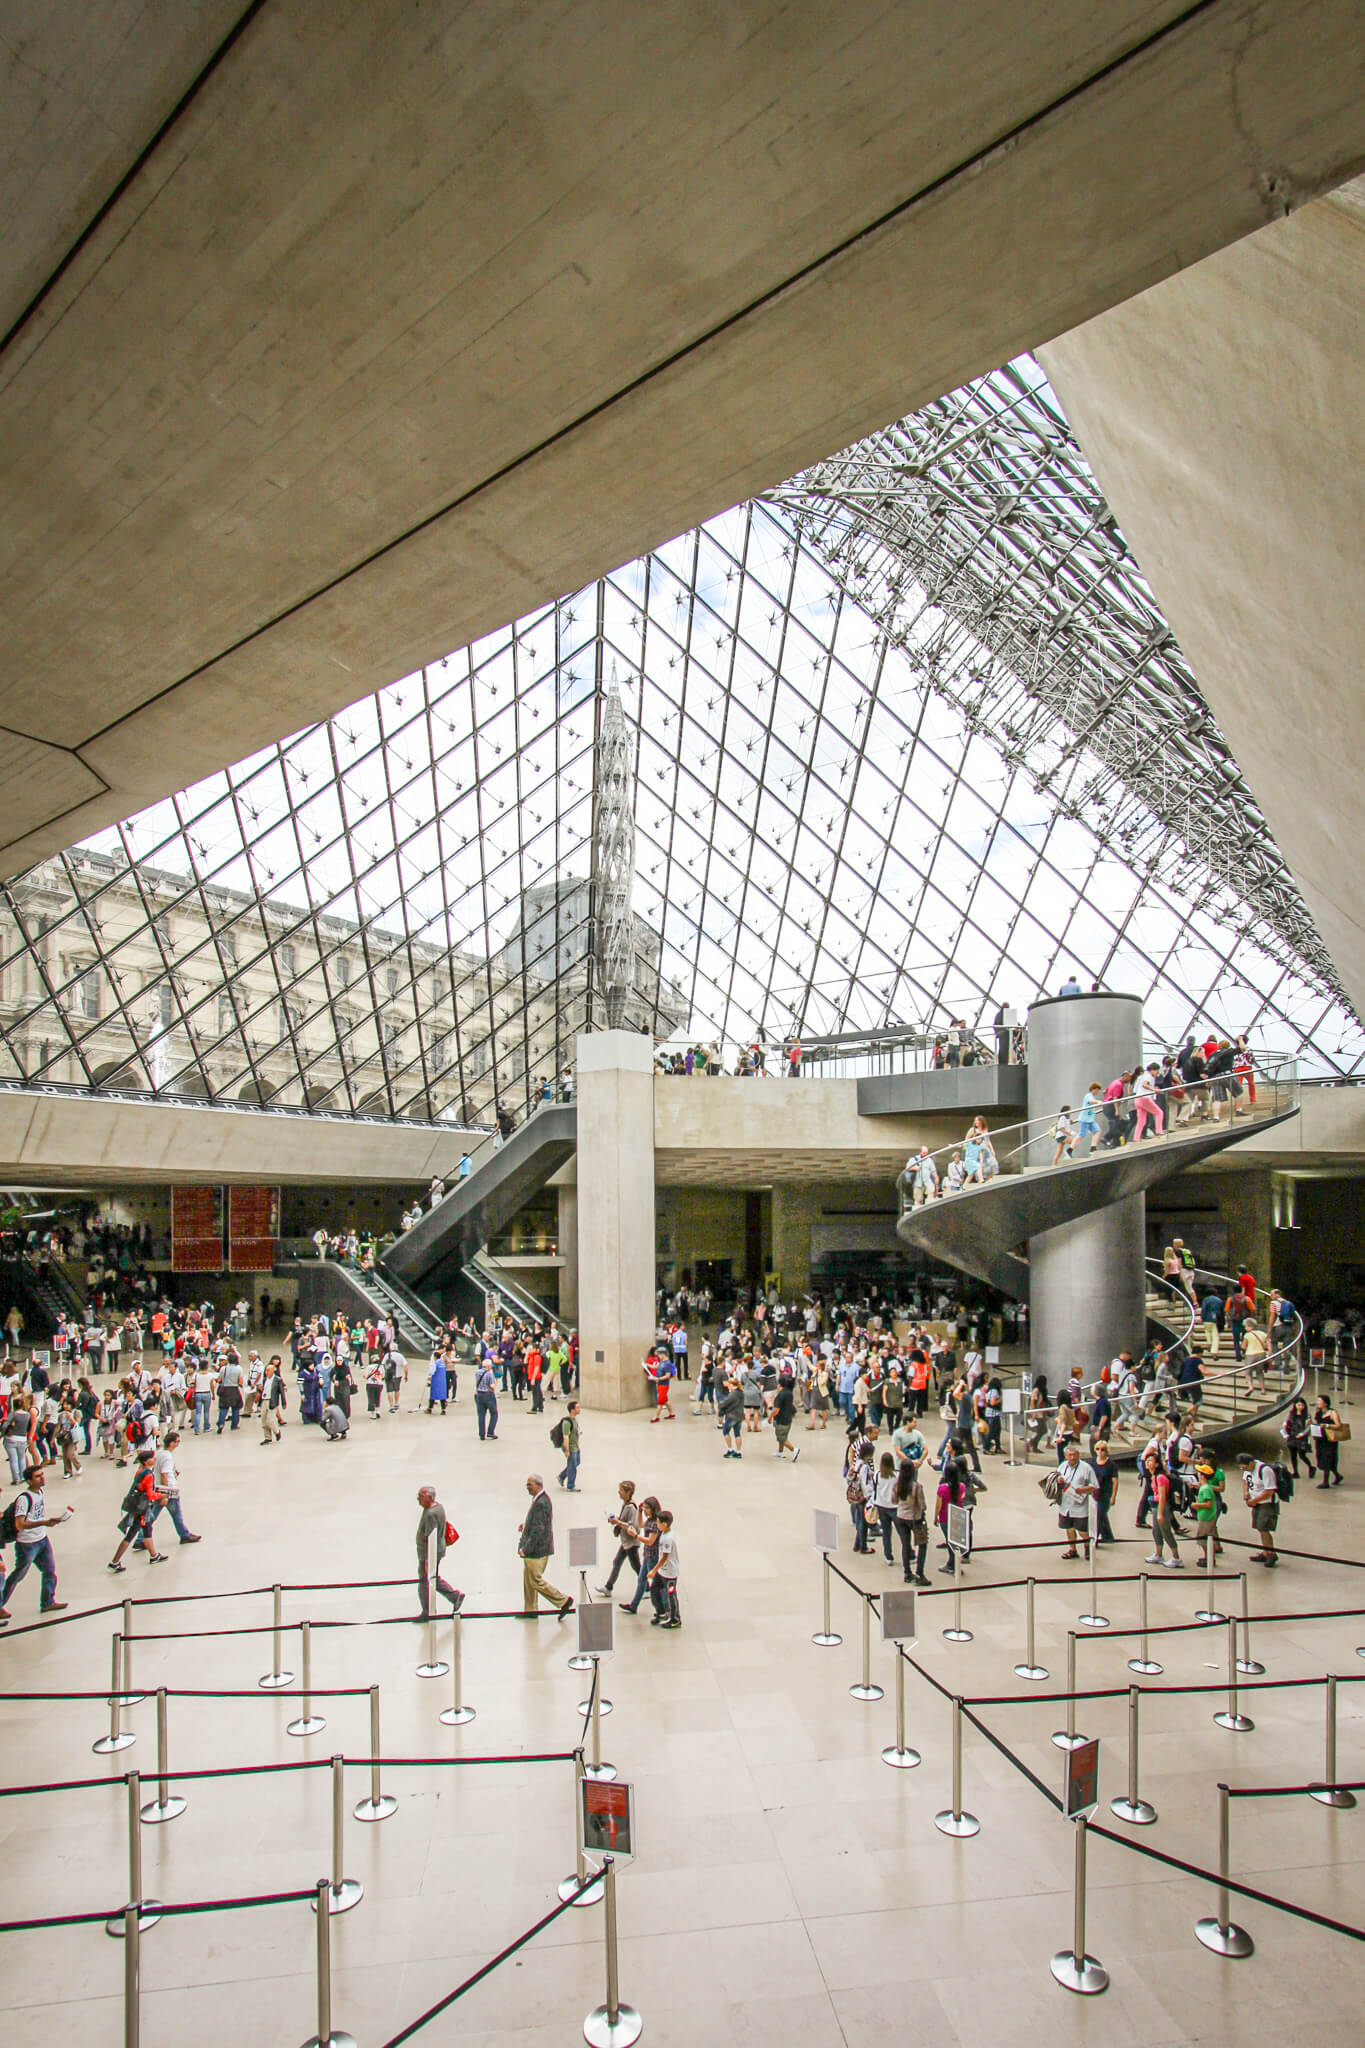 The interior of the glass pyramid at the Louvre